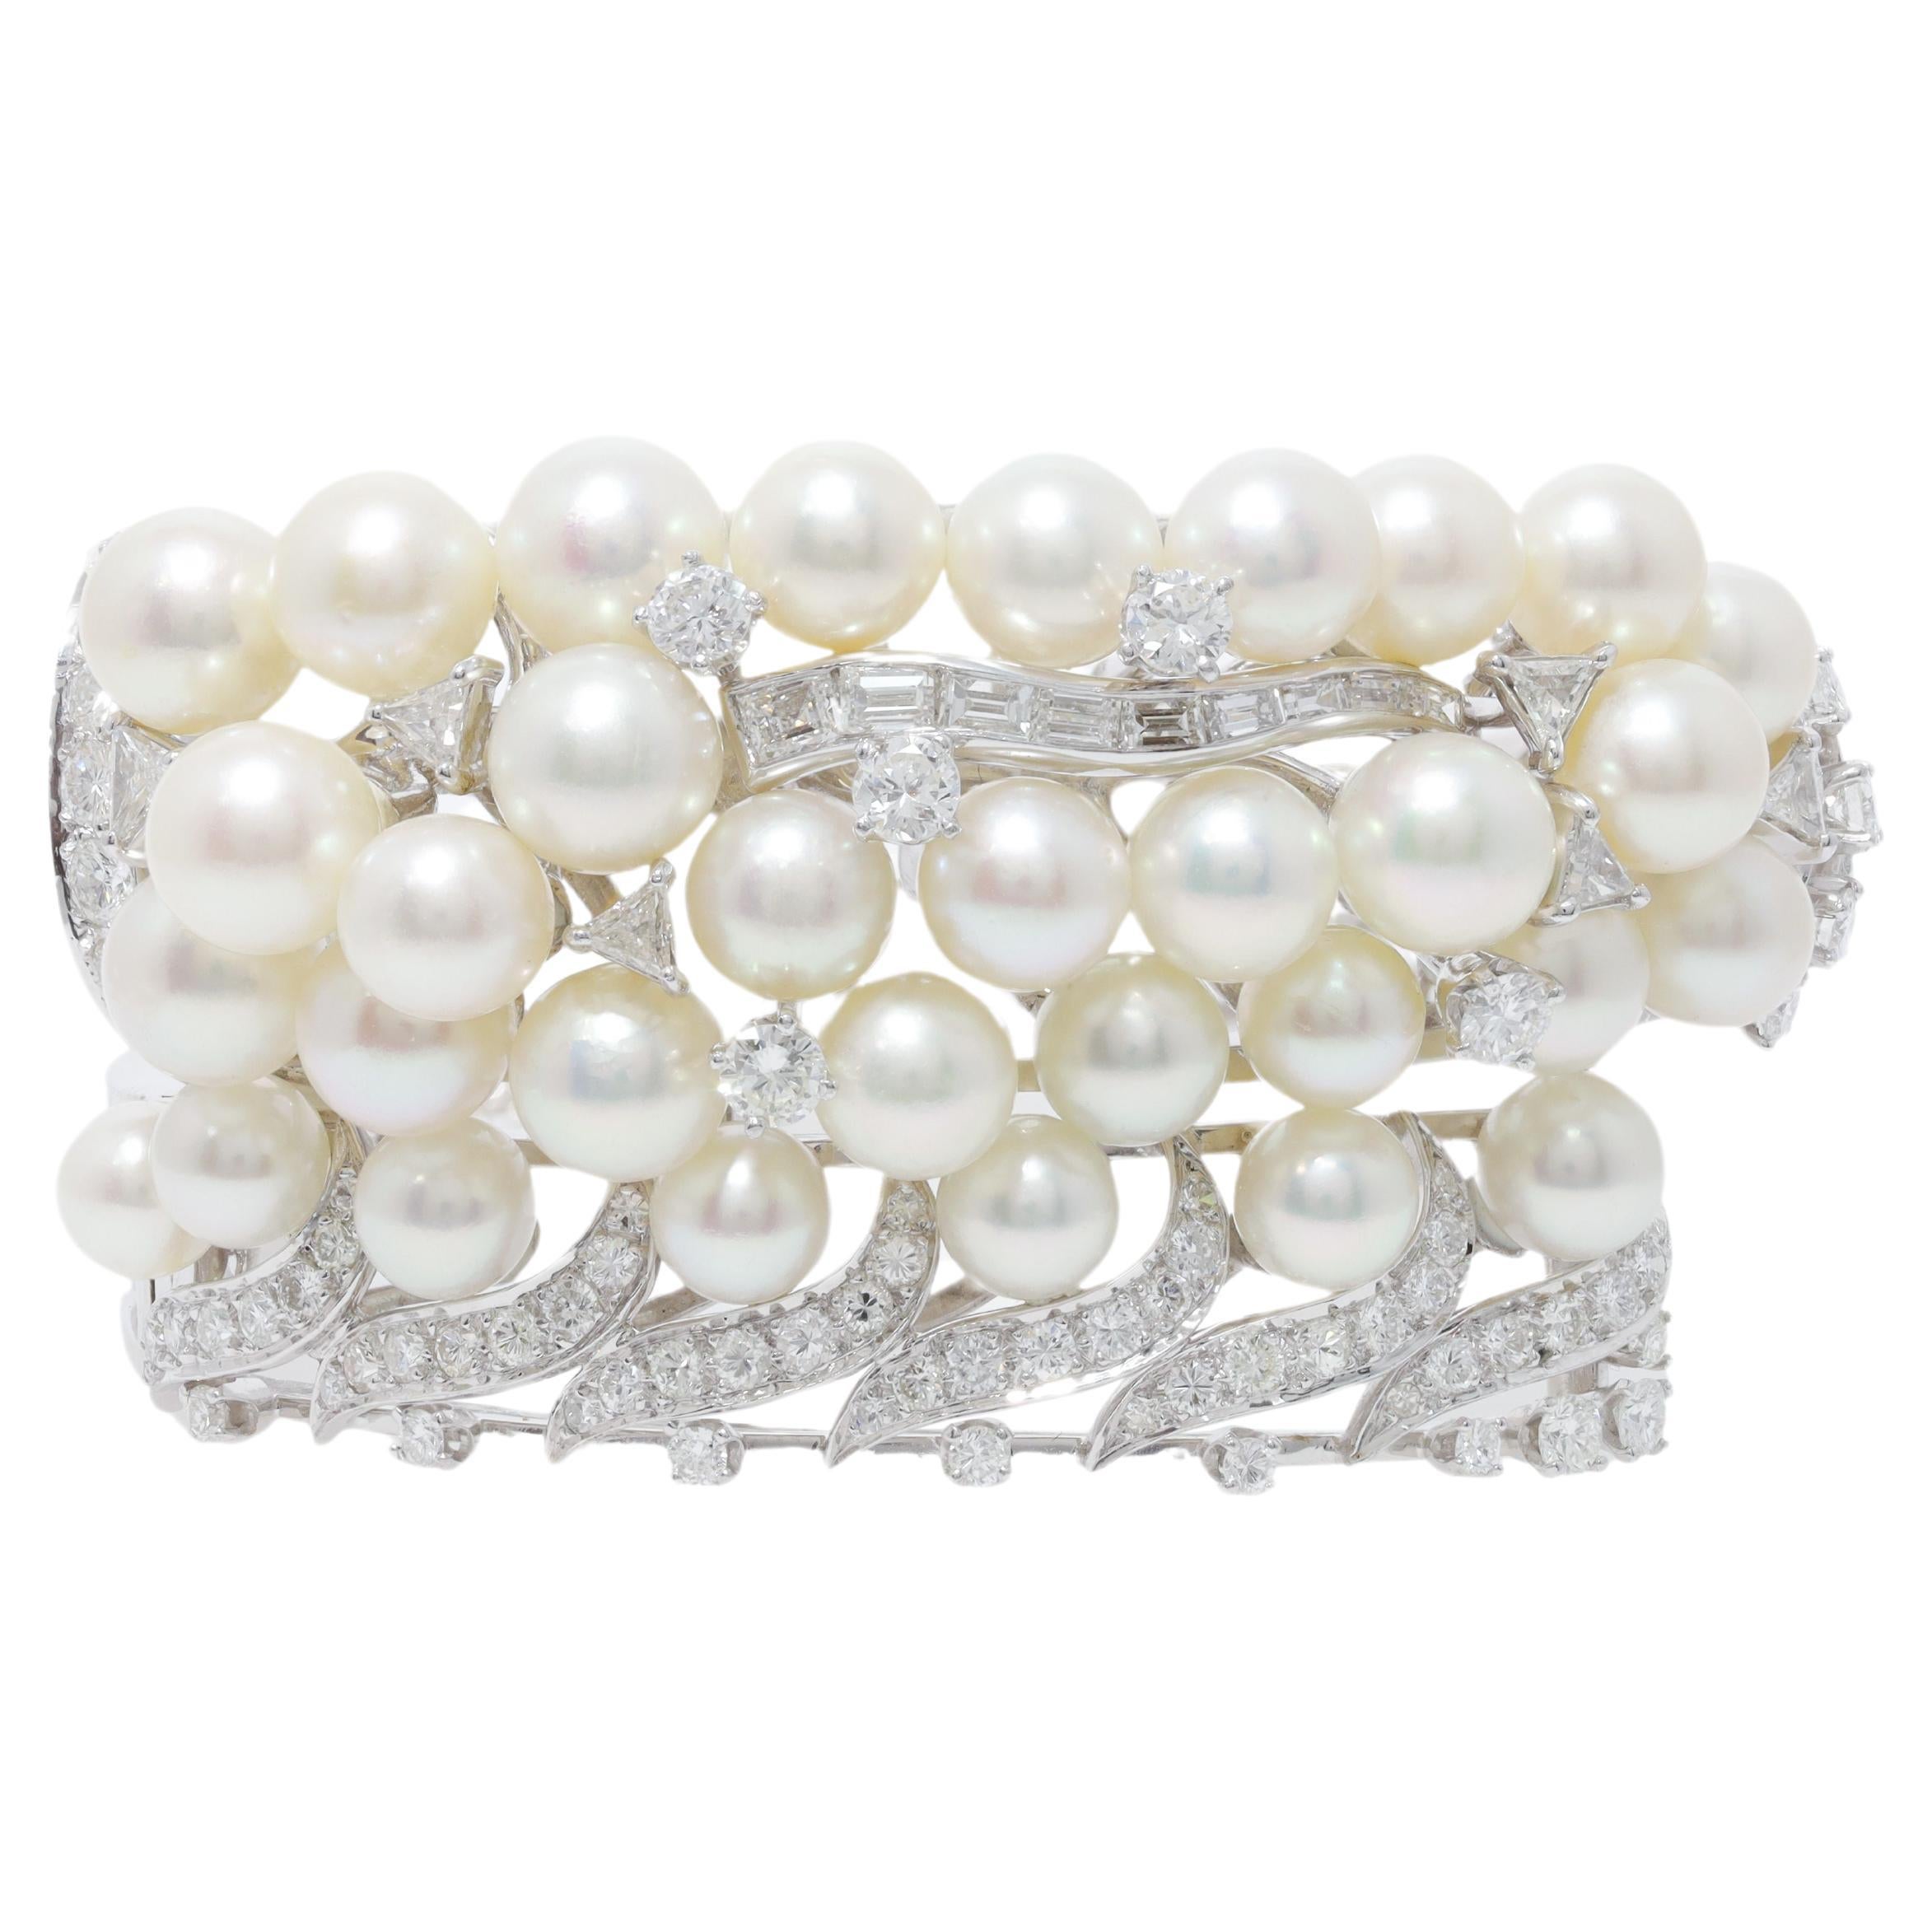 Diana M 5.00cts Diamond & Pearl Antique Bangle in 18kt White Gold For Sale